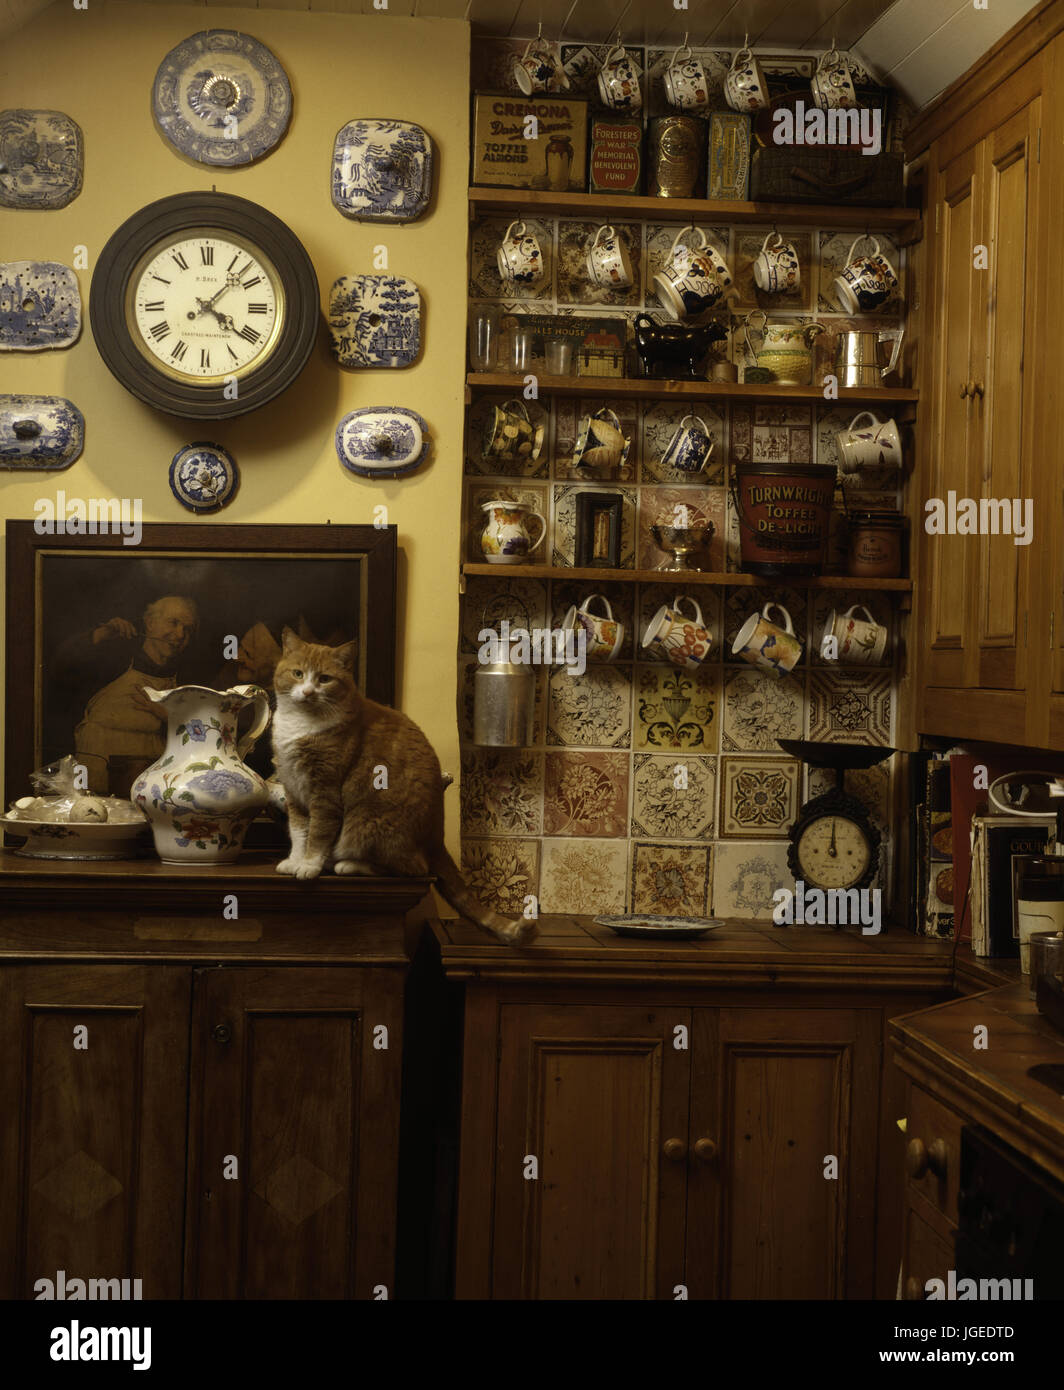 Cat sitting on old pine cupboard in Victorian style kitchen with collection of vintage china on shelves Stock Photo